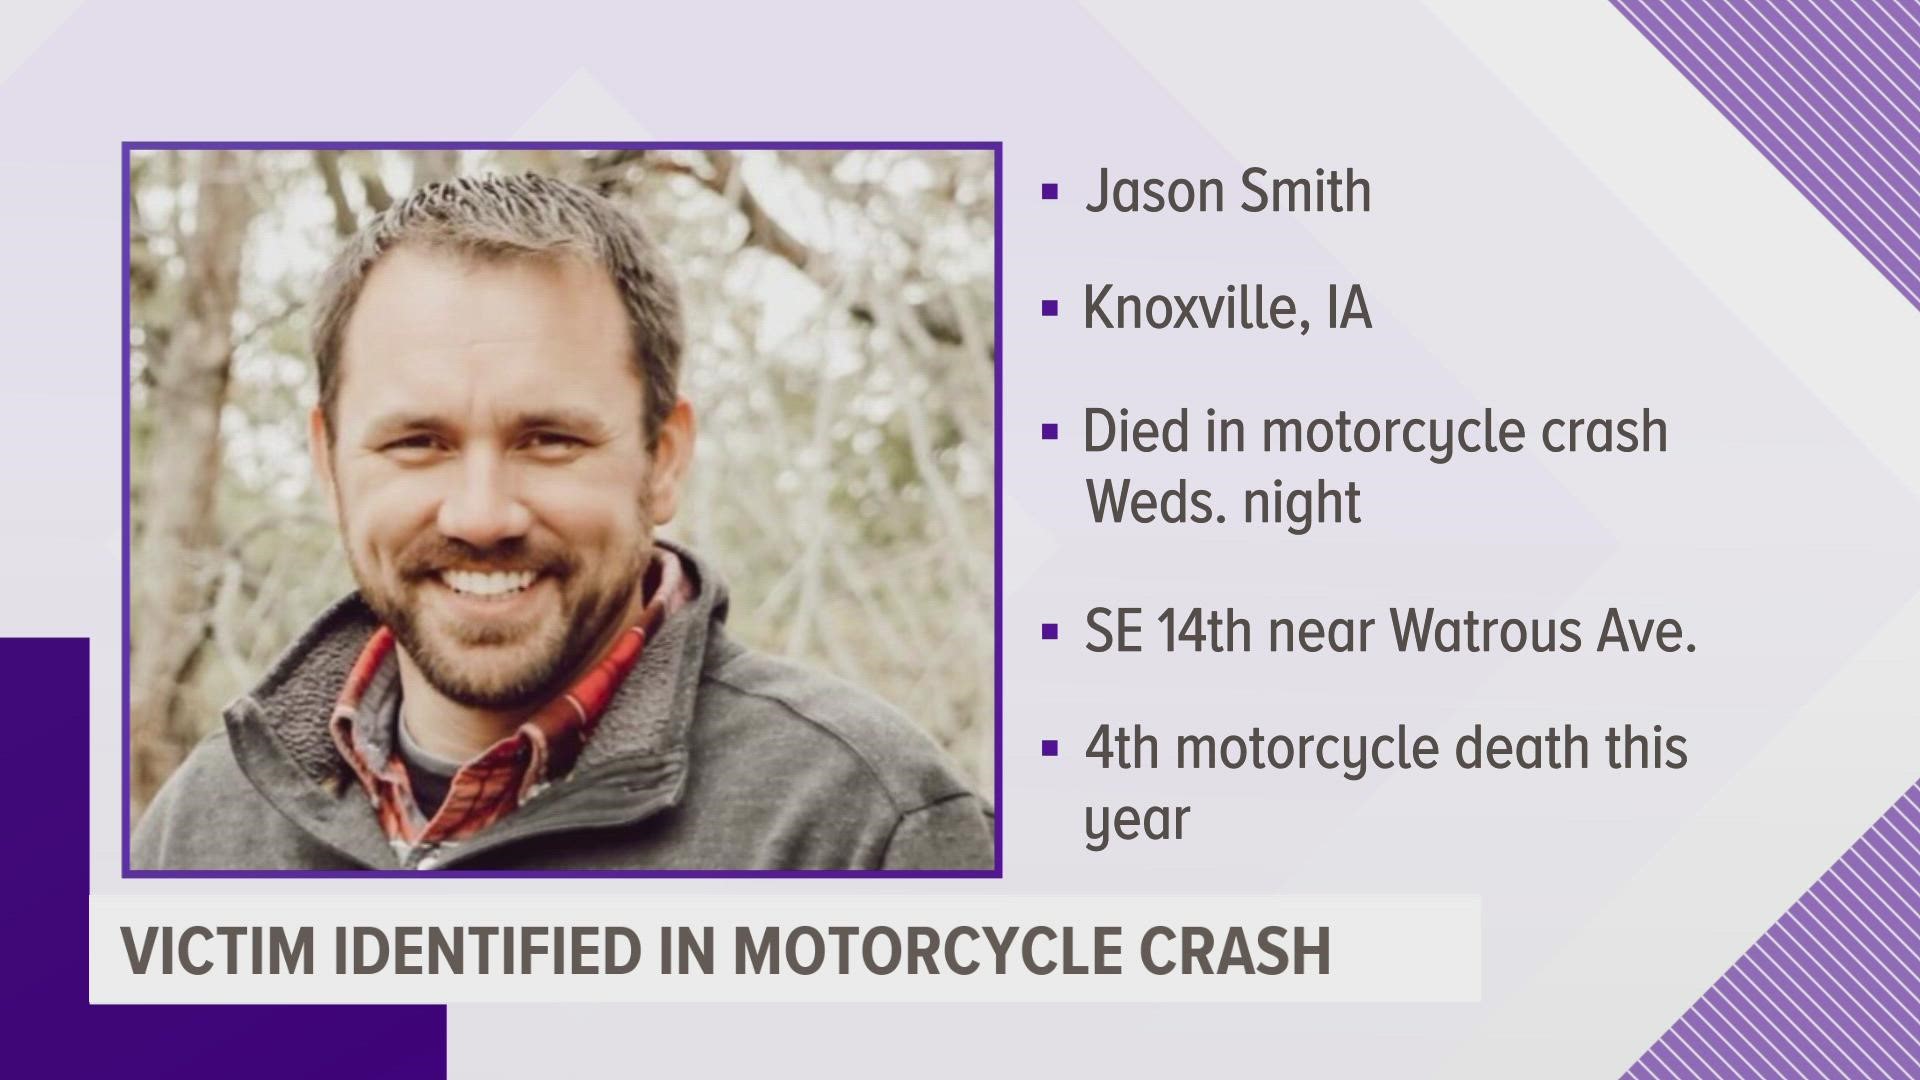 This is Des Moines' 11th traffic-related fatality of 2022.